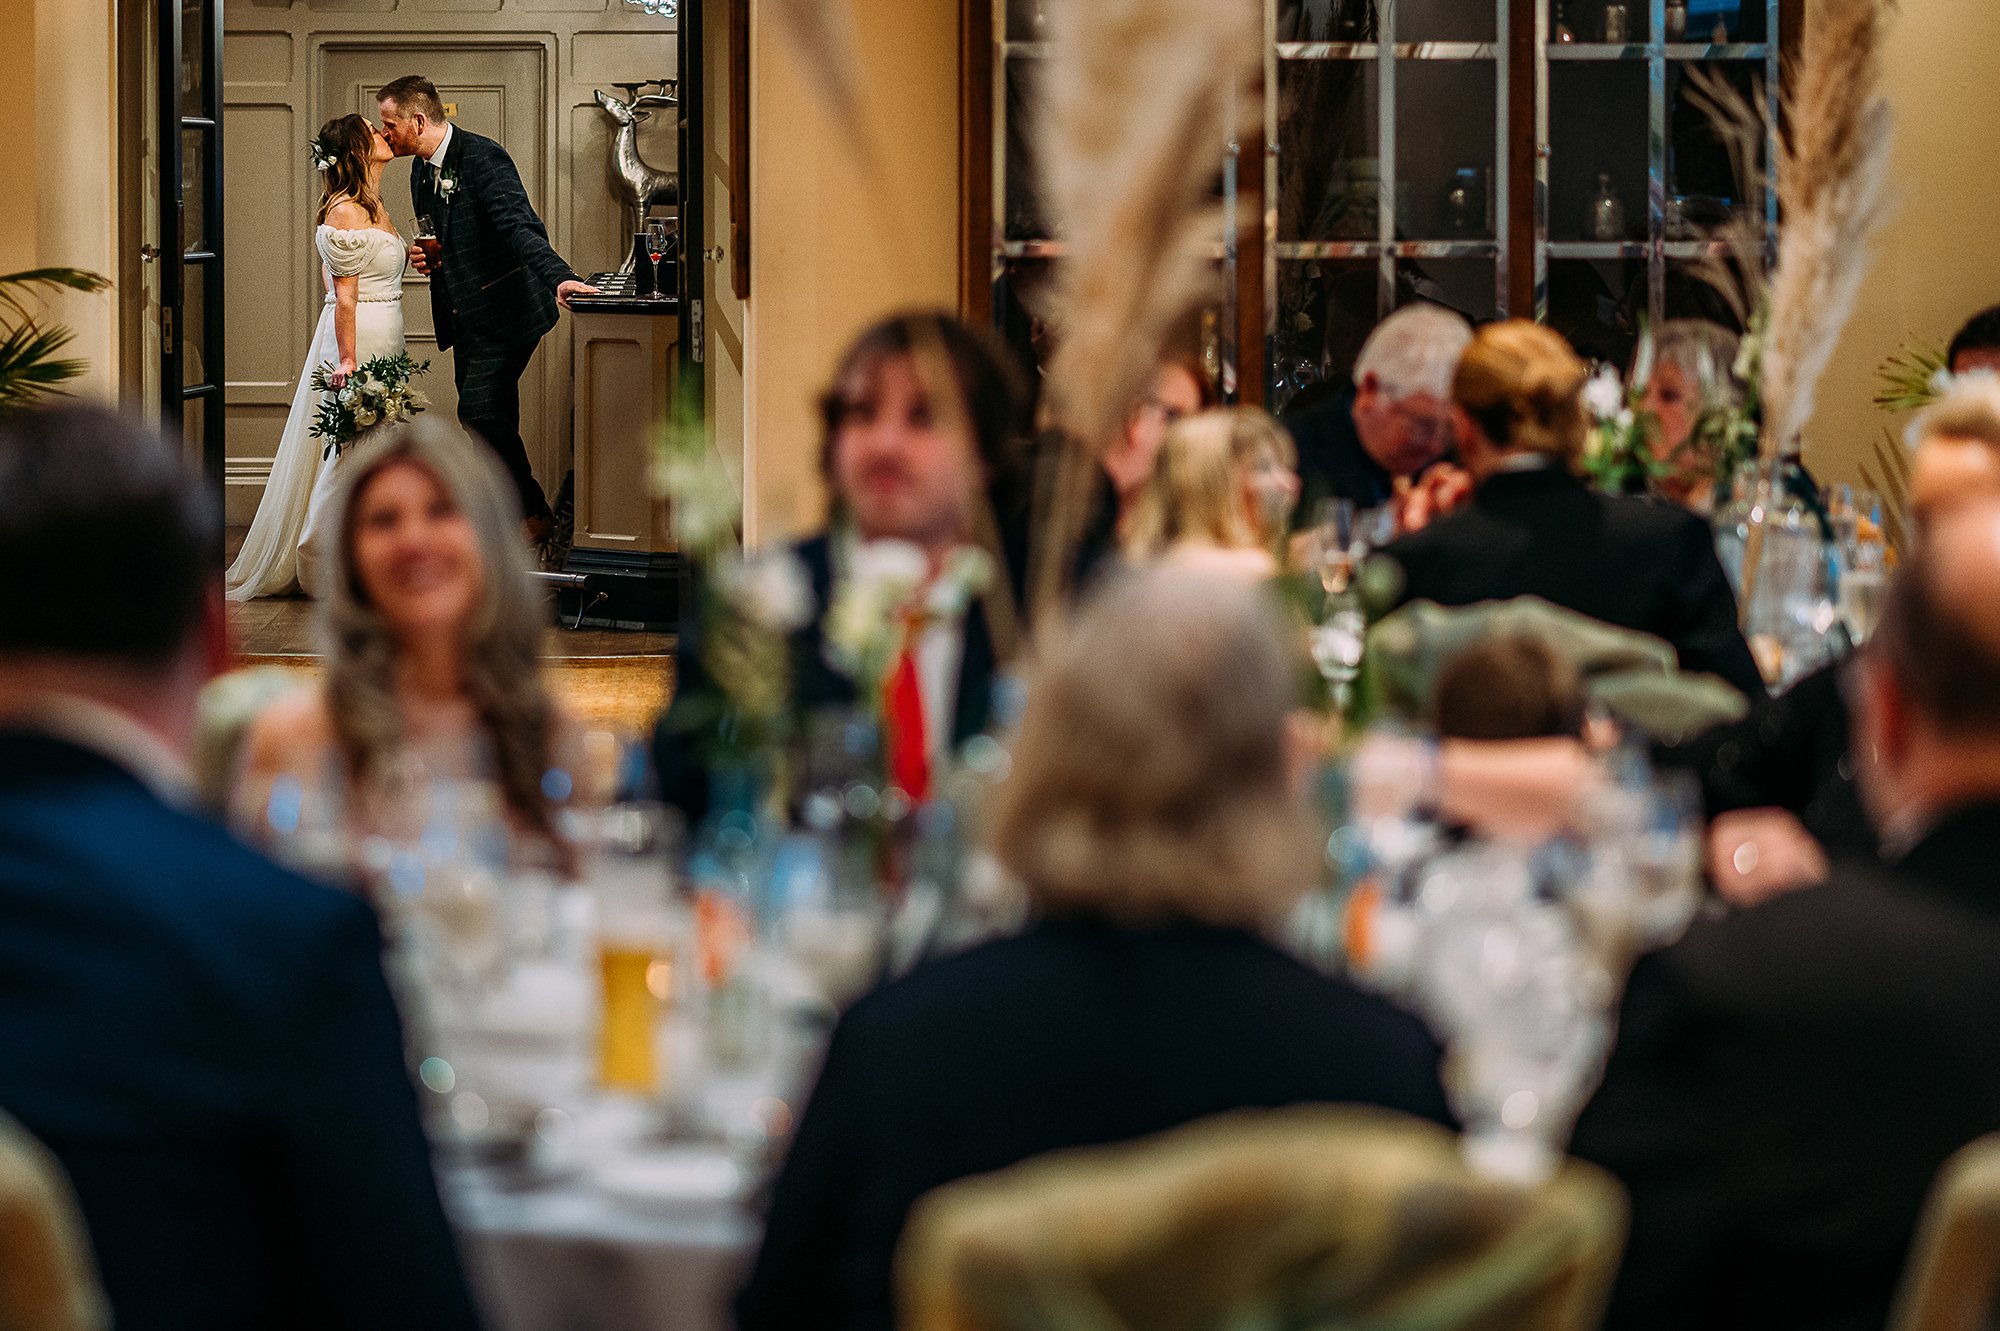  Taken through a room full of guests, bride and groom kiss in the background. 